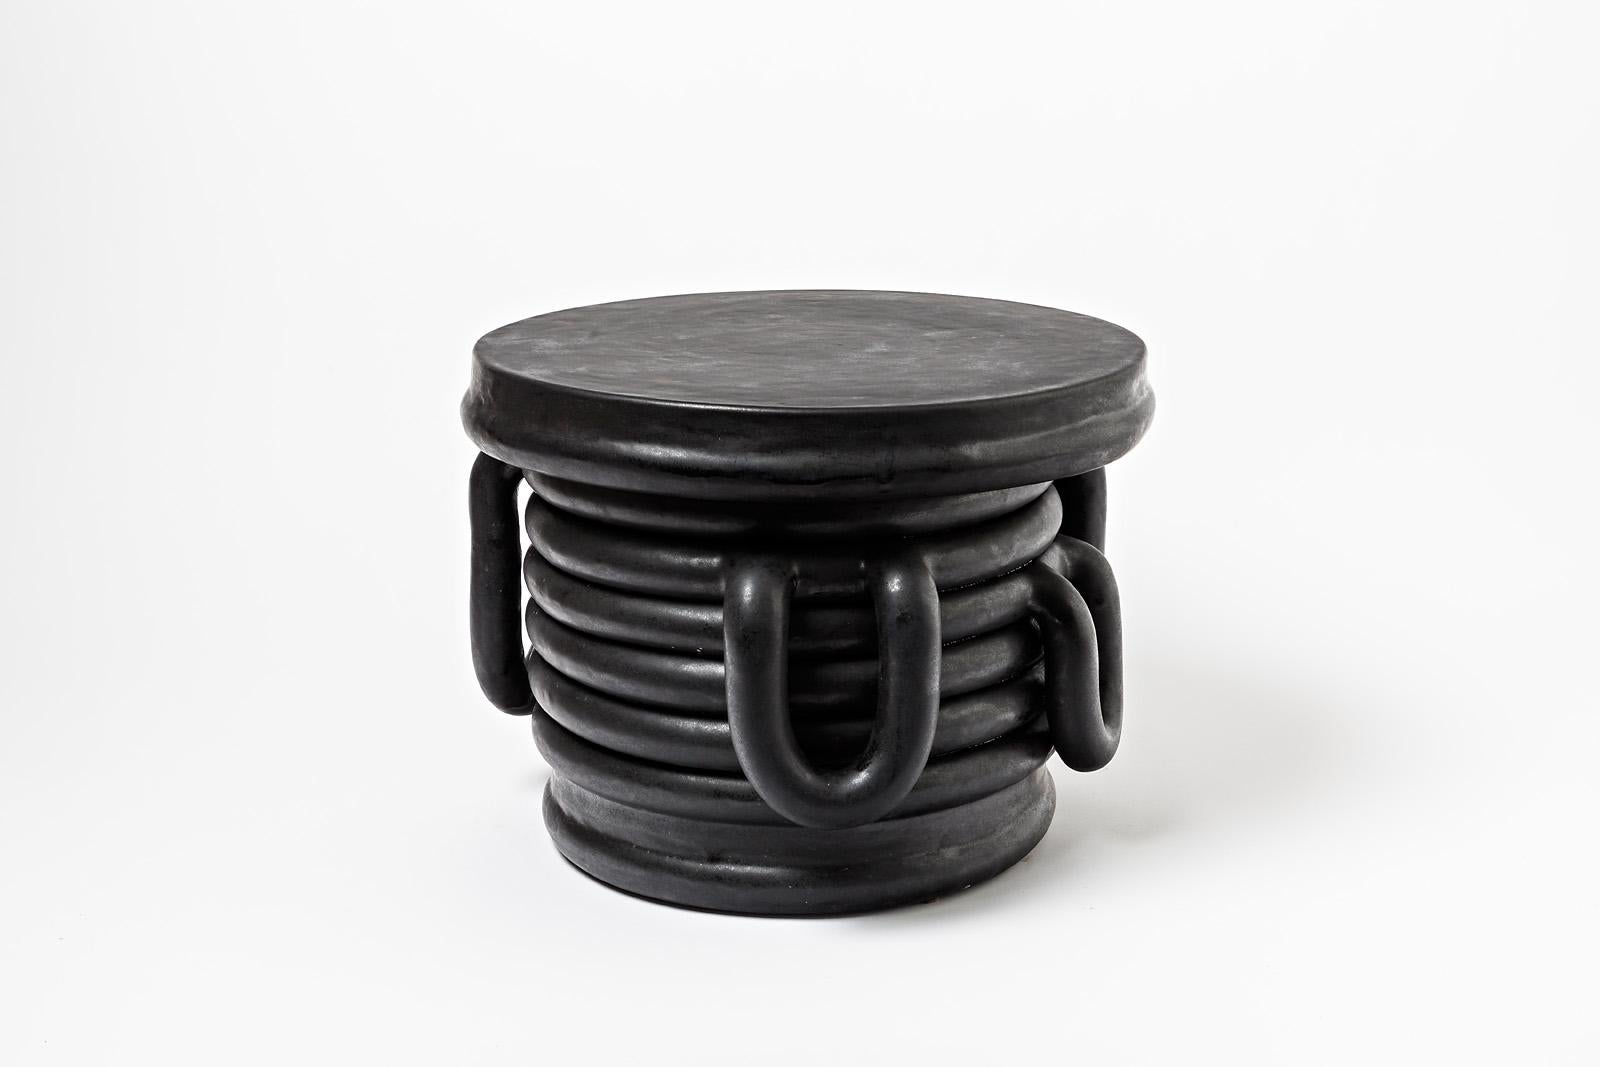 Contemporary Pair of Black Glazed Stoneware Bedside Tables by Clémentine Dupré, 2021 For Sale